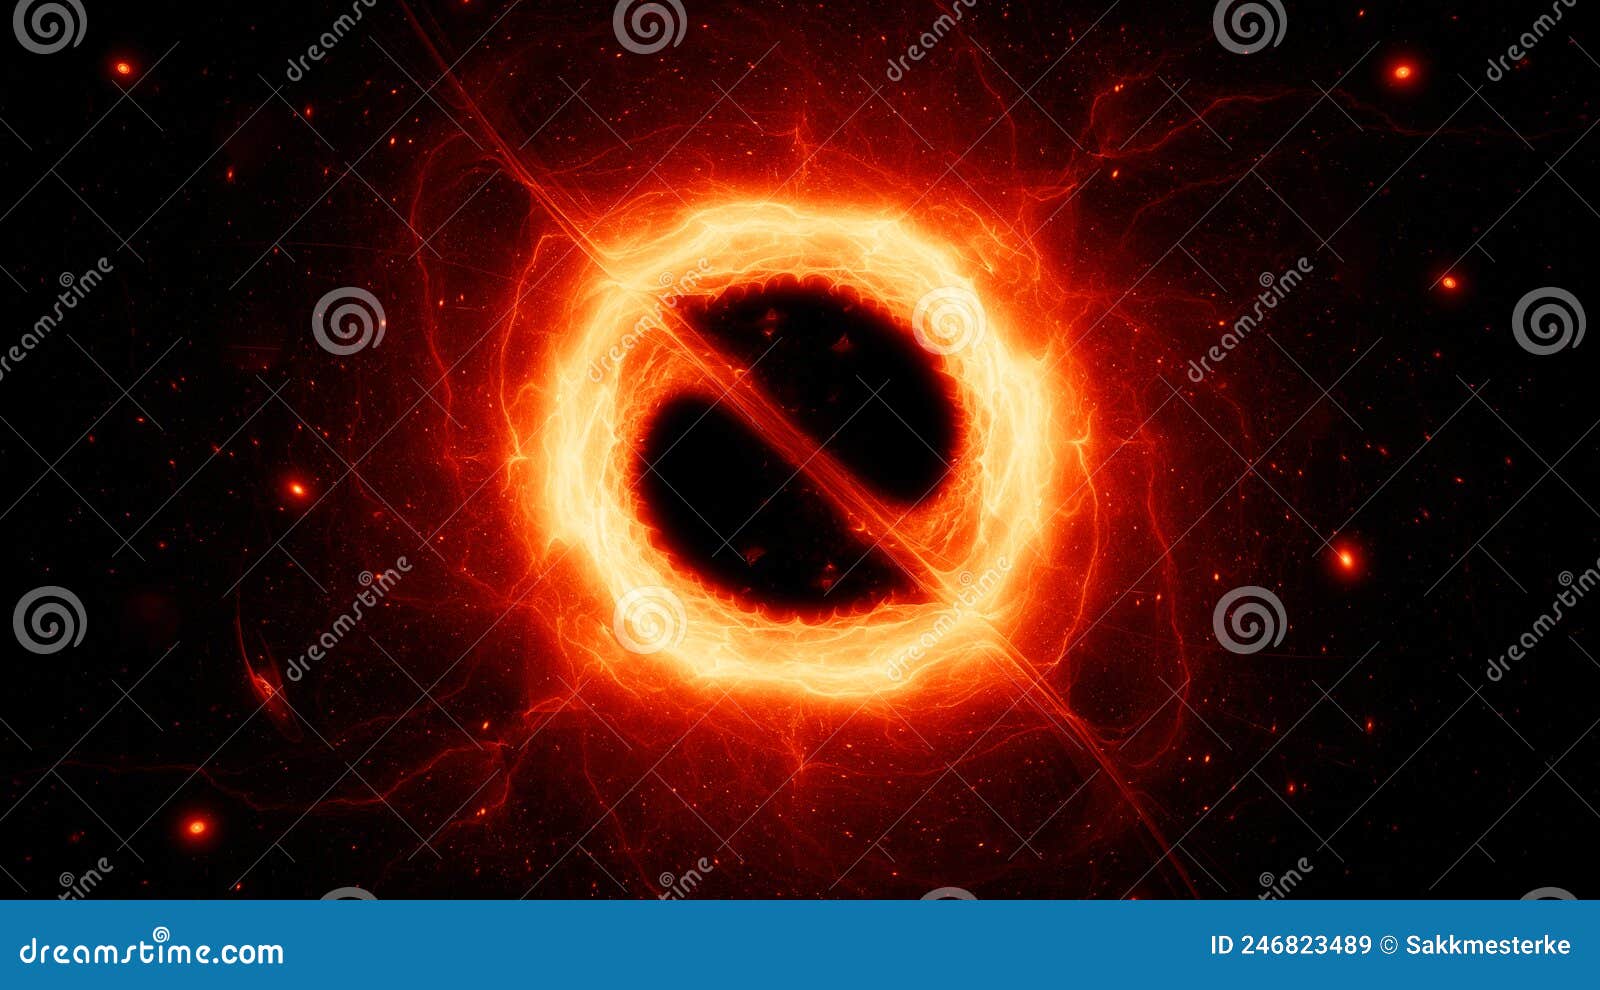 blue glowing forming of accretion disk with force field